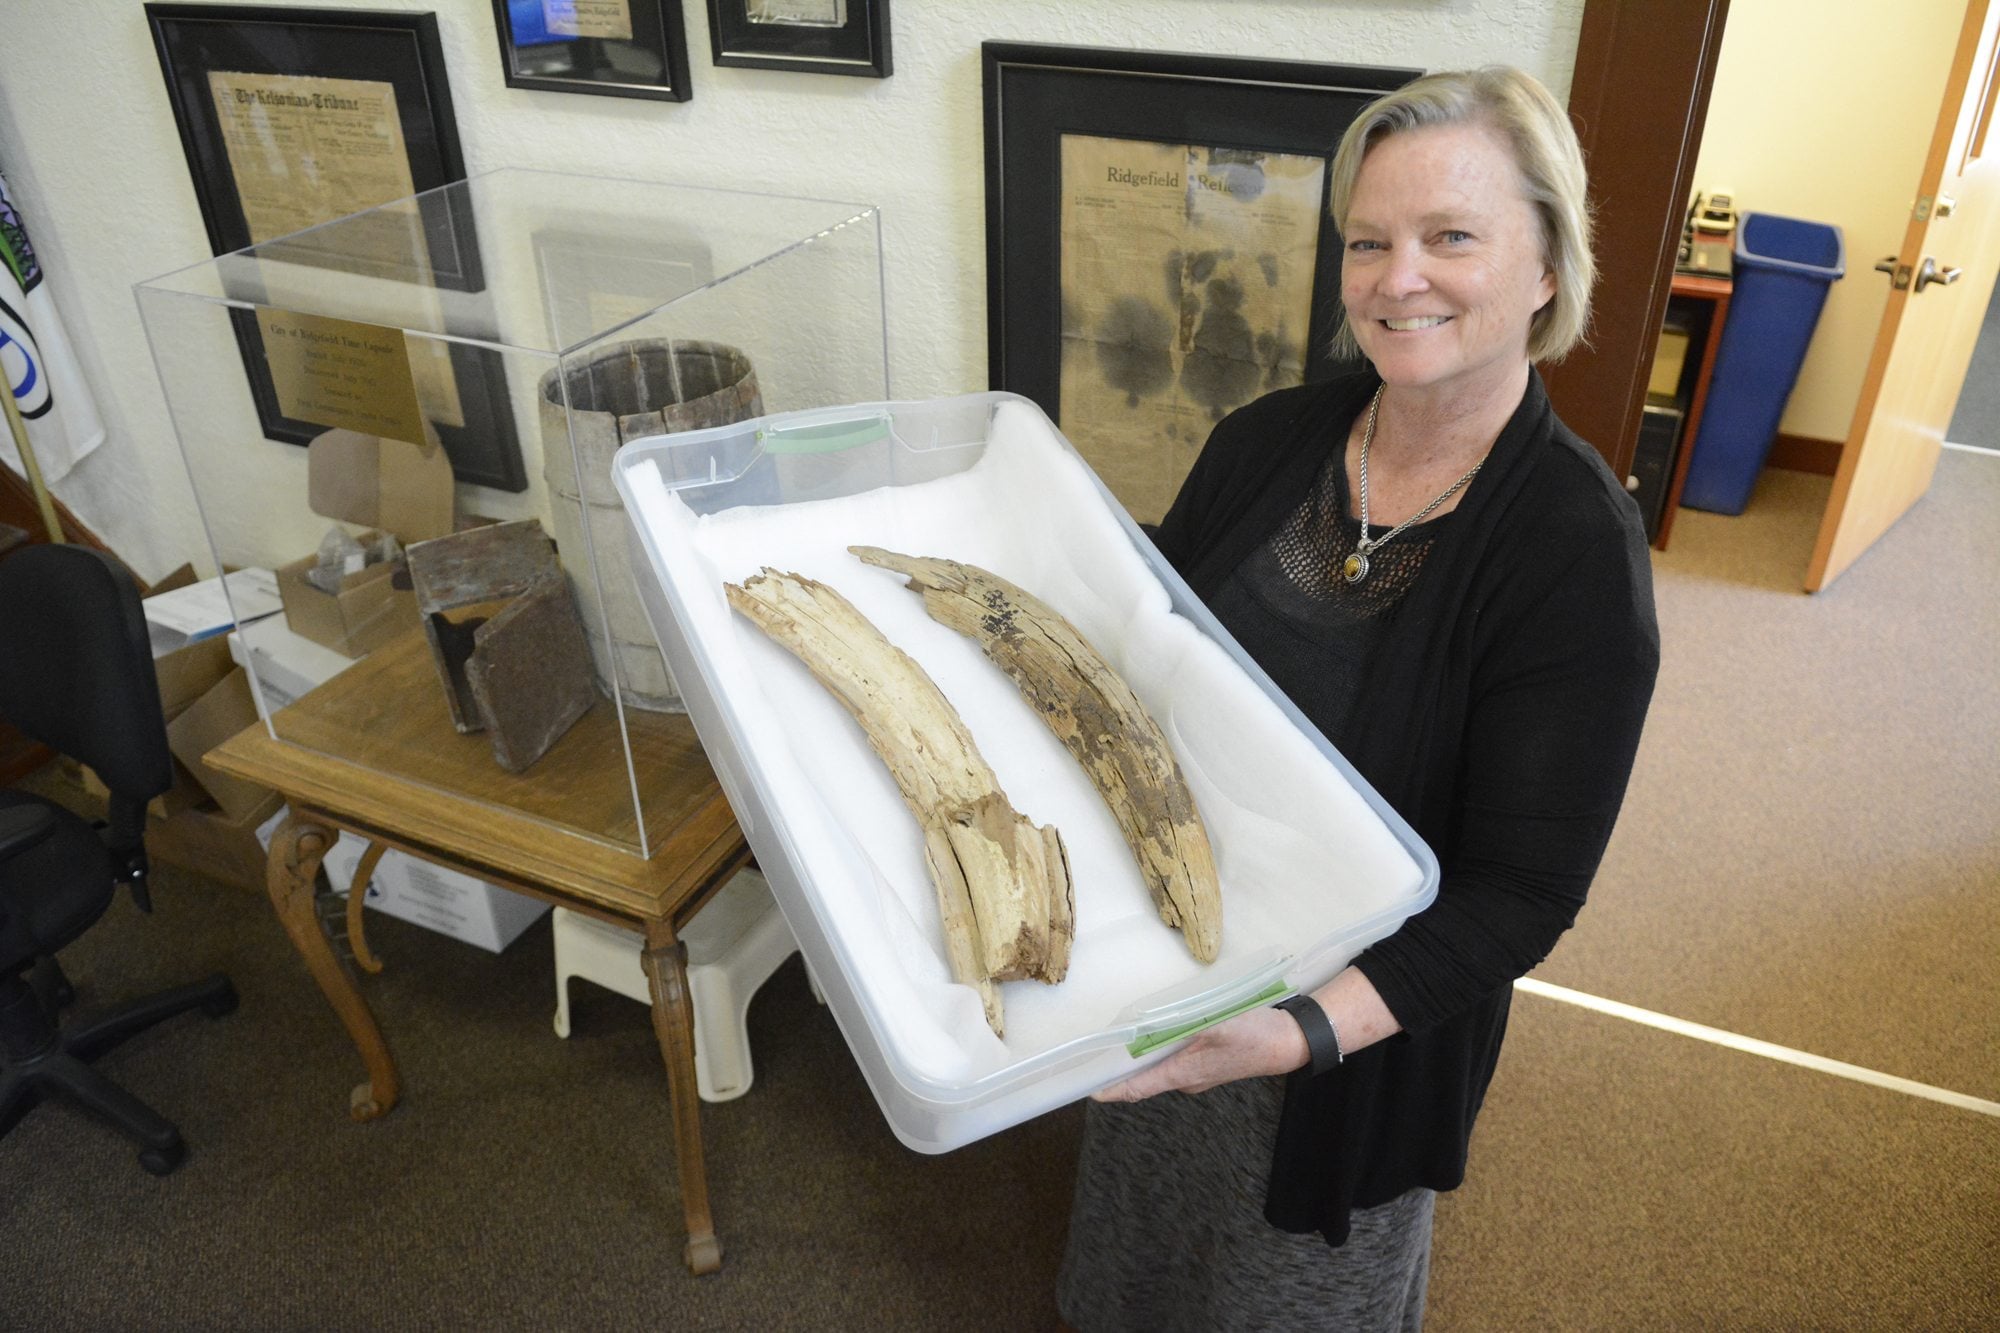 Lee Knottenerus, administrative service director for the city of Ridgefield, holds one of three containers containing the remains of a 20,000-year-old mammoth tusk discovered locally in 2010.